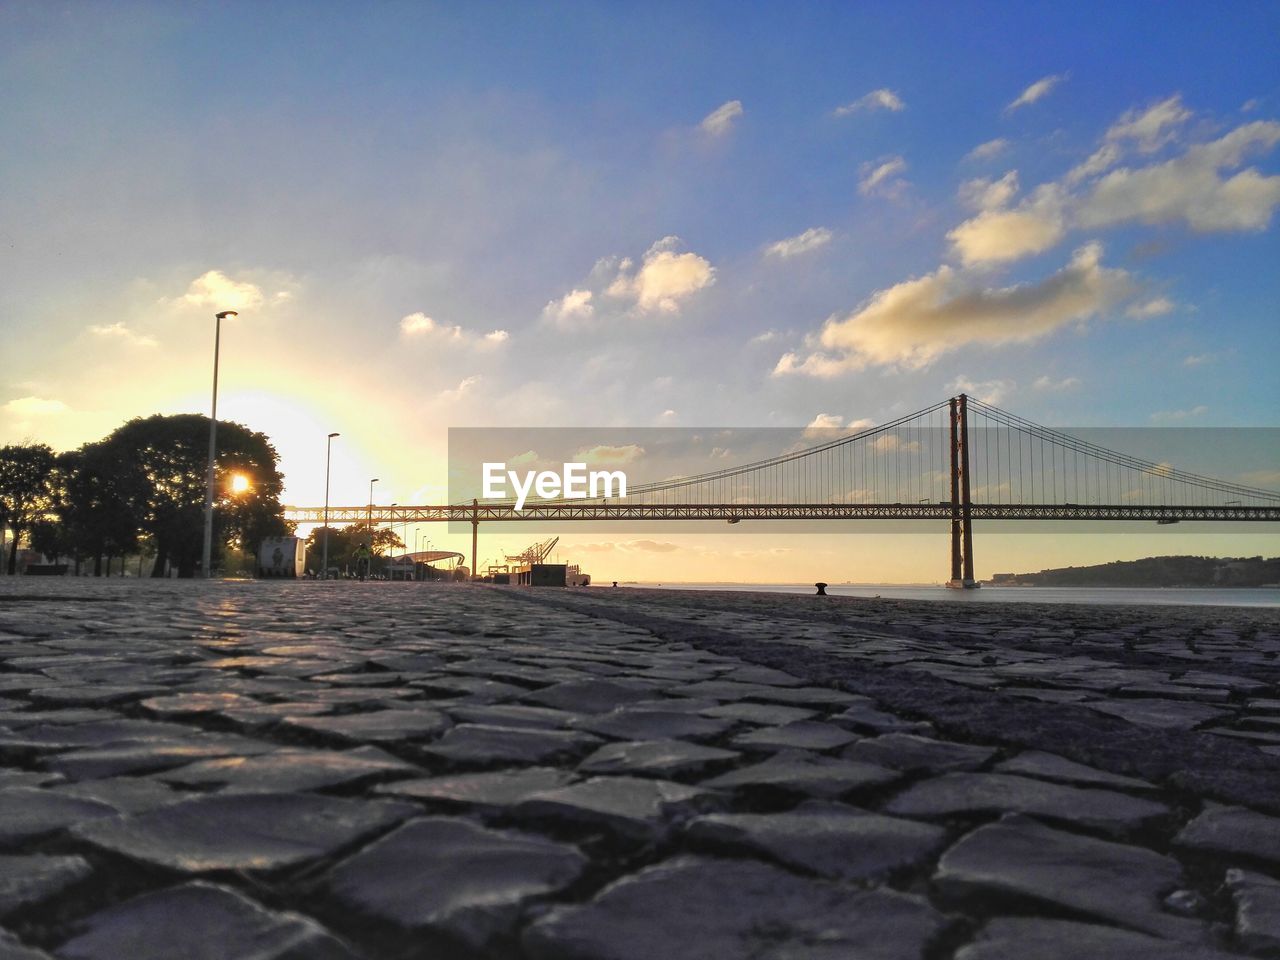 April 25th bridge over tagus river during sunset